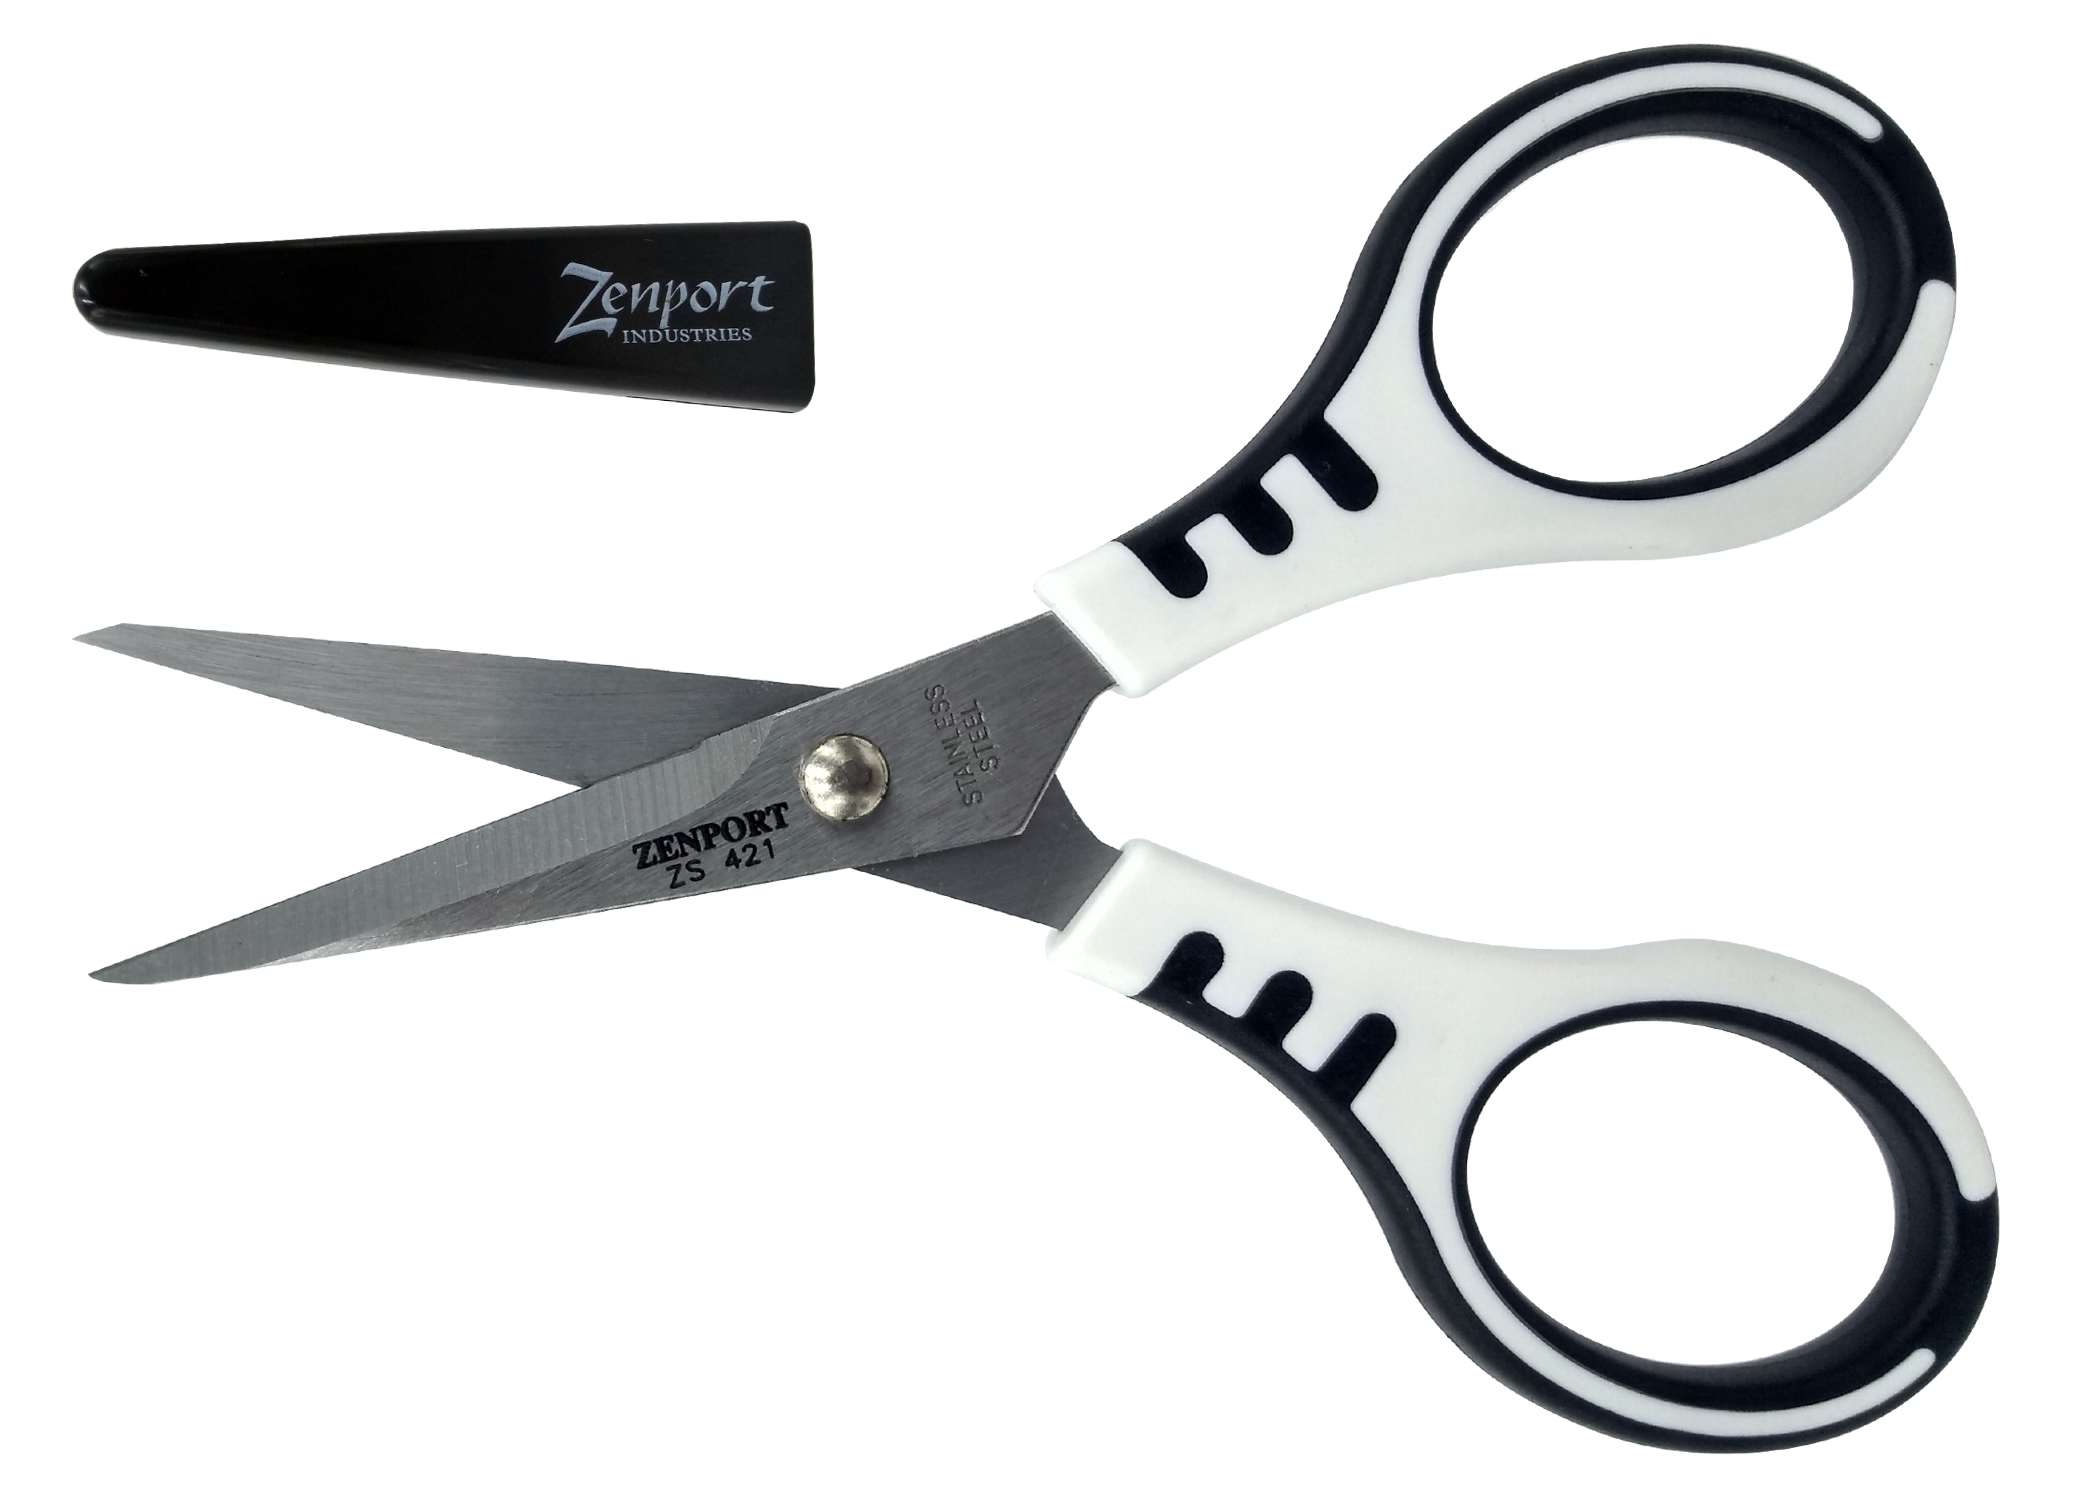 Scissors ZS421 Trimmer Bee, 5.25-inch long, Stainless, Safety Cap